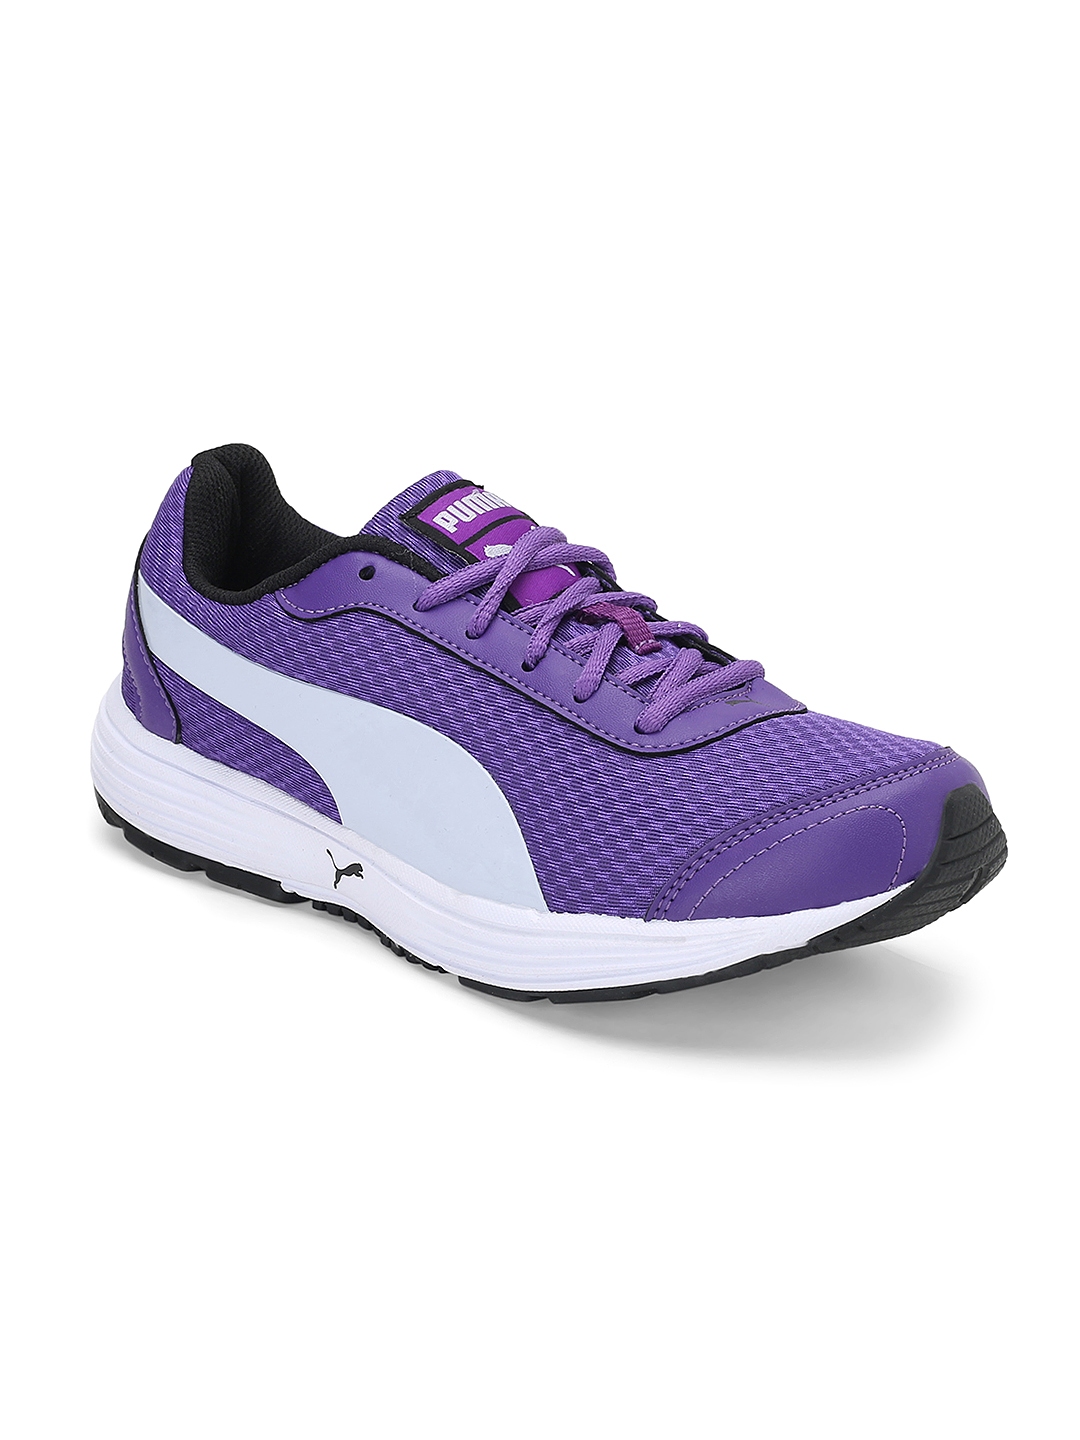 Buy Puma Women Purple Reed Wns DP Running Shoes - Sports Shoes for ...